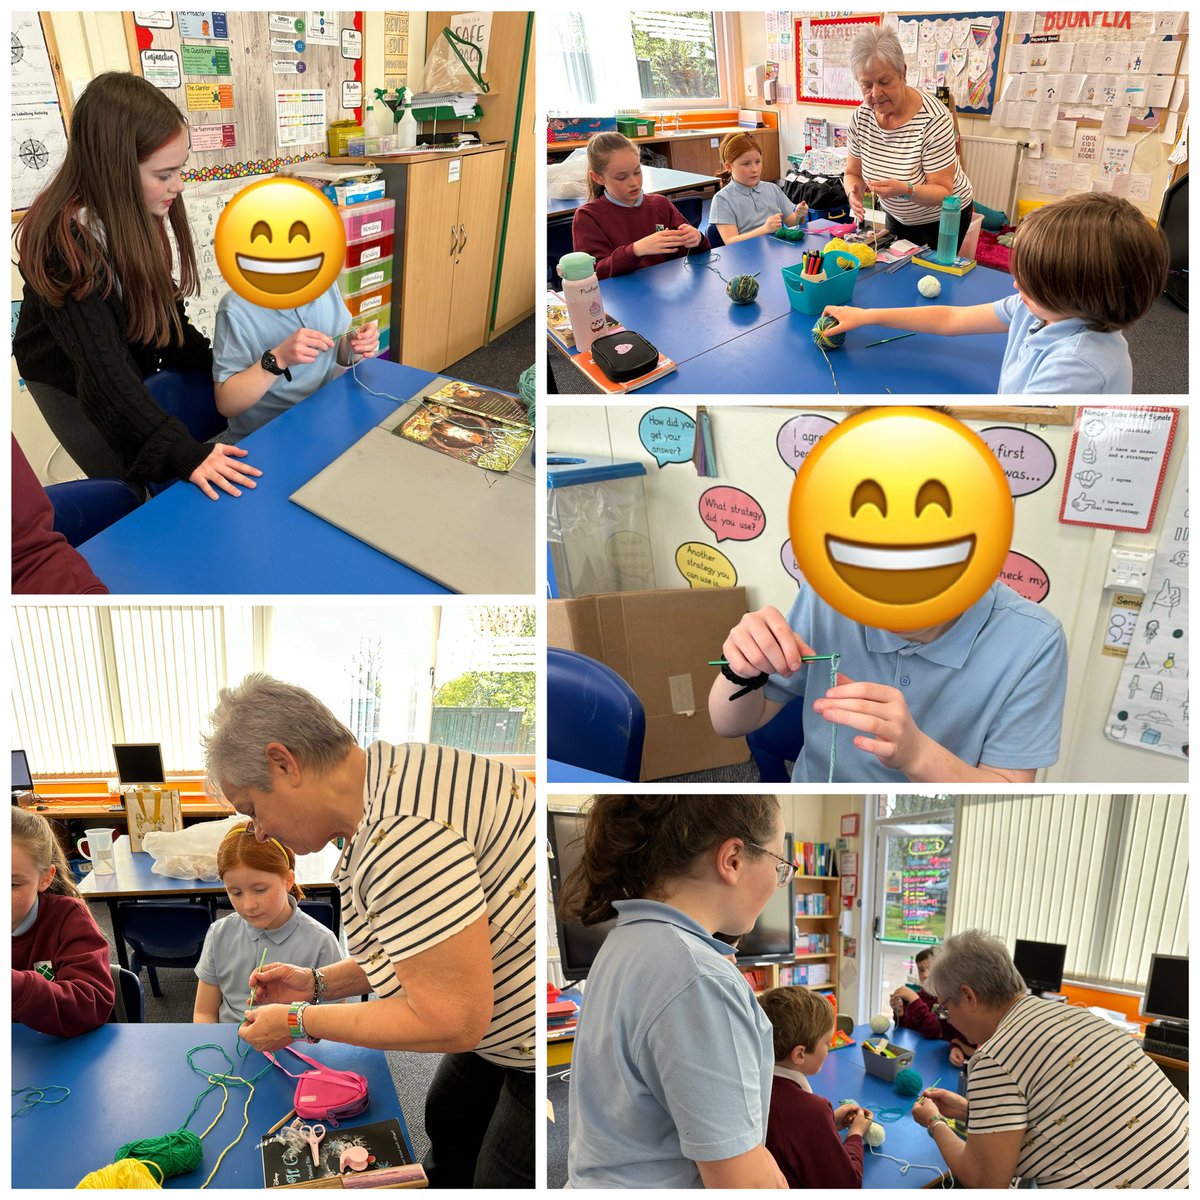 Class 2 have created a partnership with a member of the community, who has teamed up with one of our pupils to implement a 4 week block of crochet🧶 #CrosshillClass2 #Creativity #ExpressiveArts #Partnerships